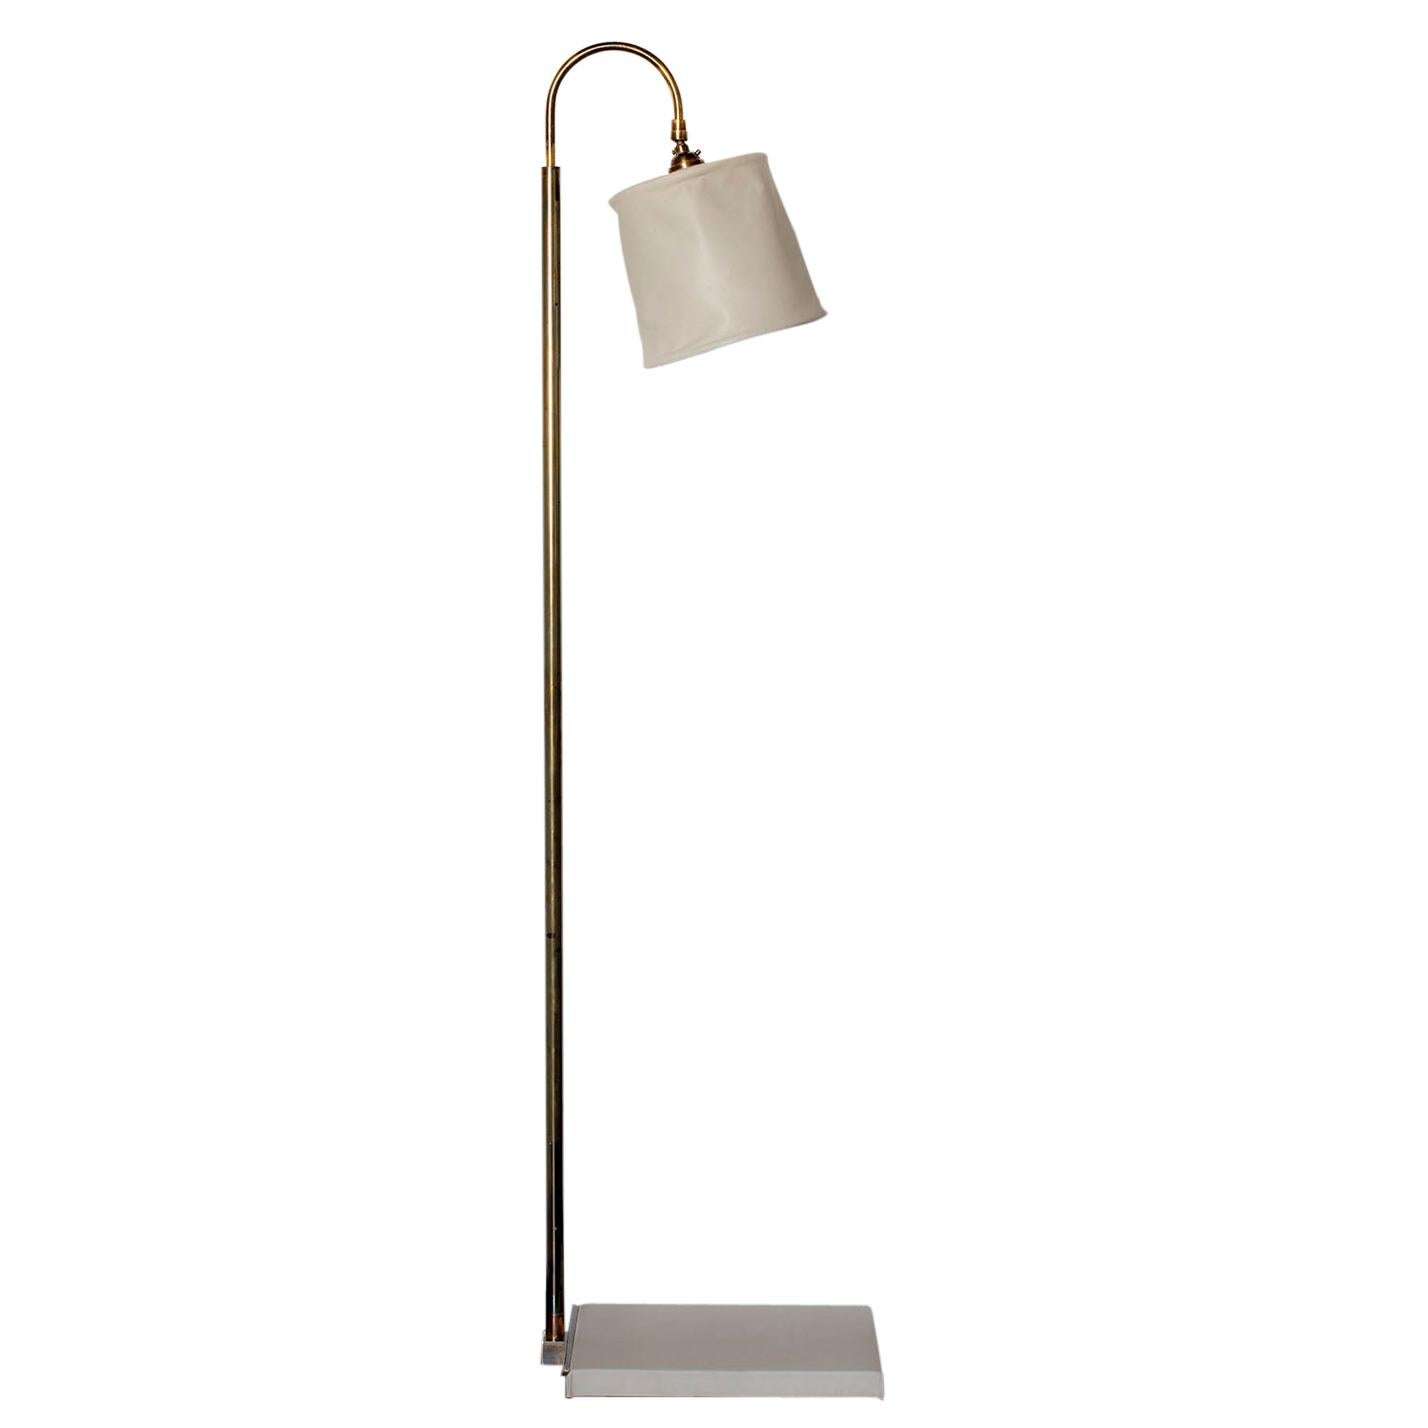 Series01 Floor Lamp, Hand-Dyed Ash Leather, "Smoke" Patinated Brass, Pivoting